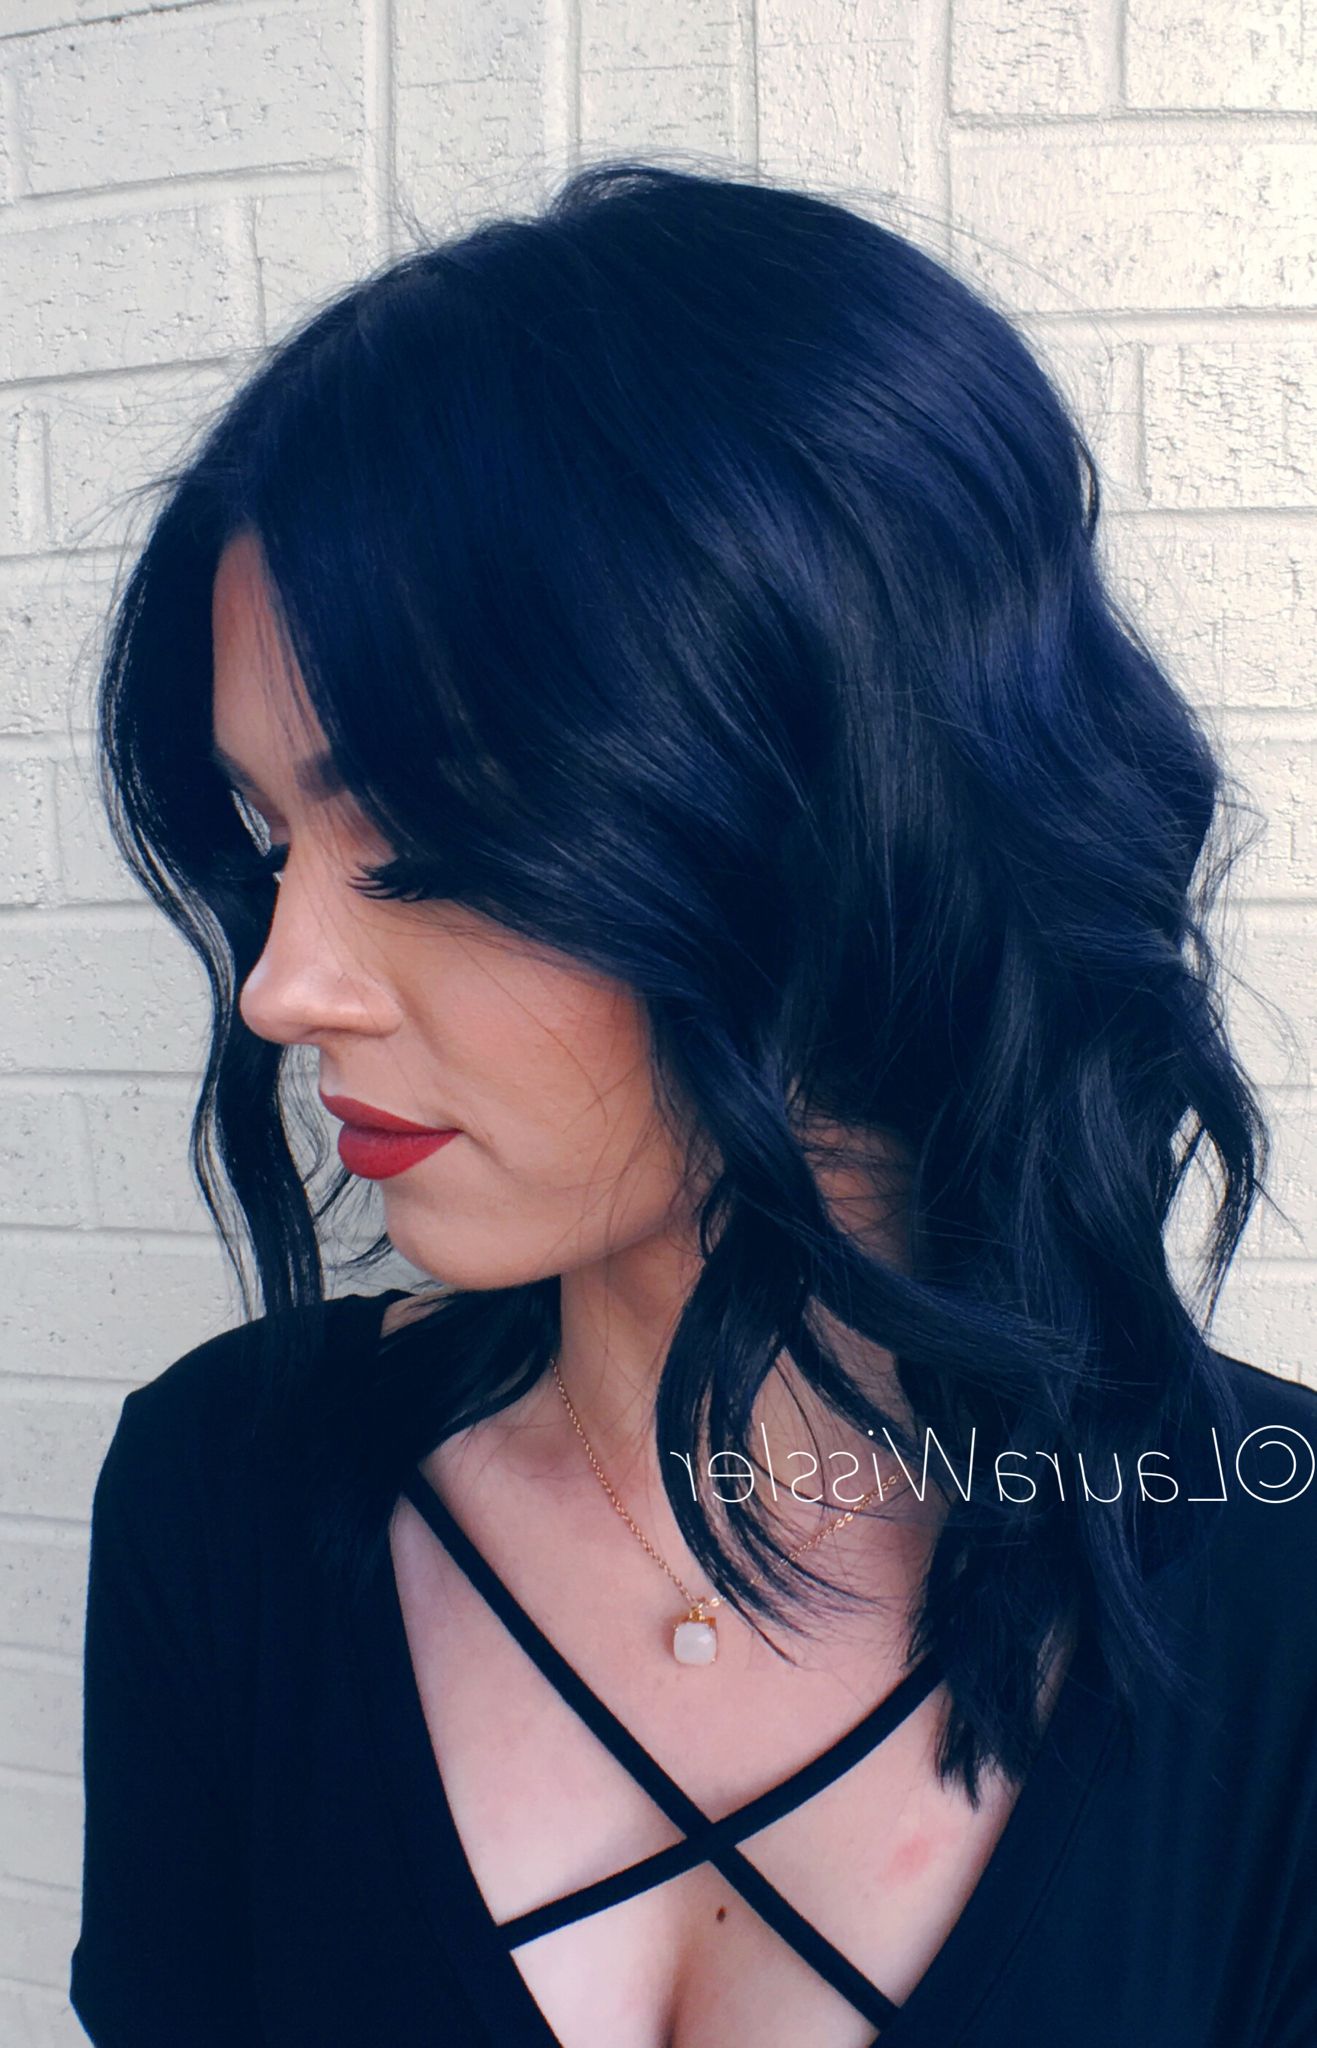 Midnight Blue Black Hair Color & Textured Lob Instagram With Preferred Medium Hairstyles With Color For Black Women (View 6 of 20)